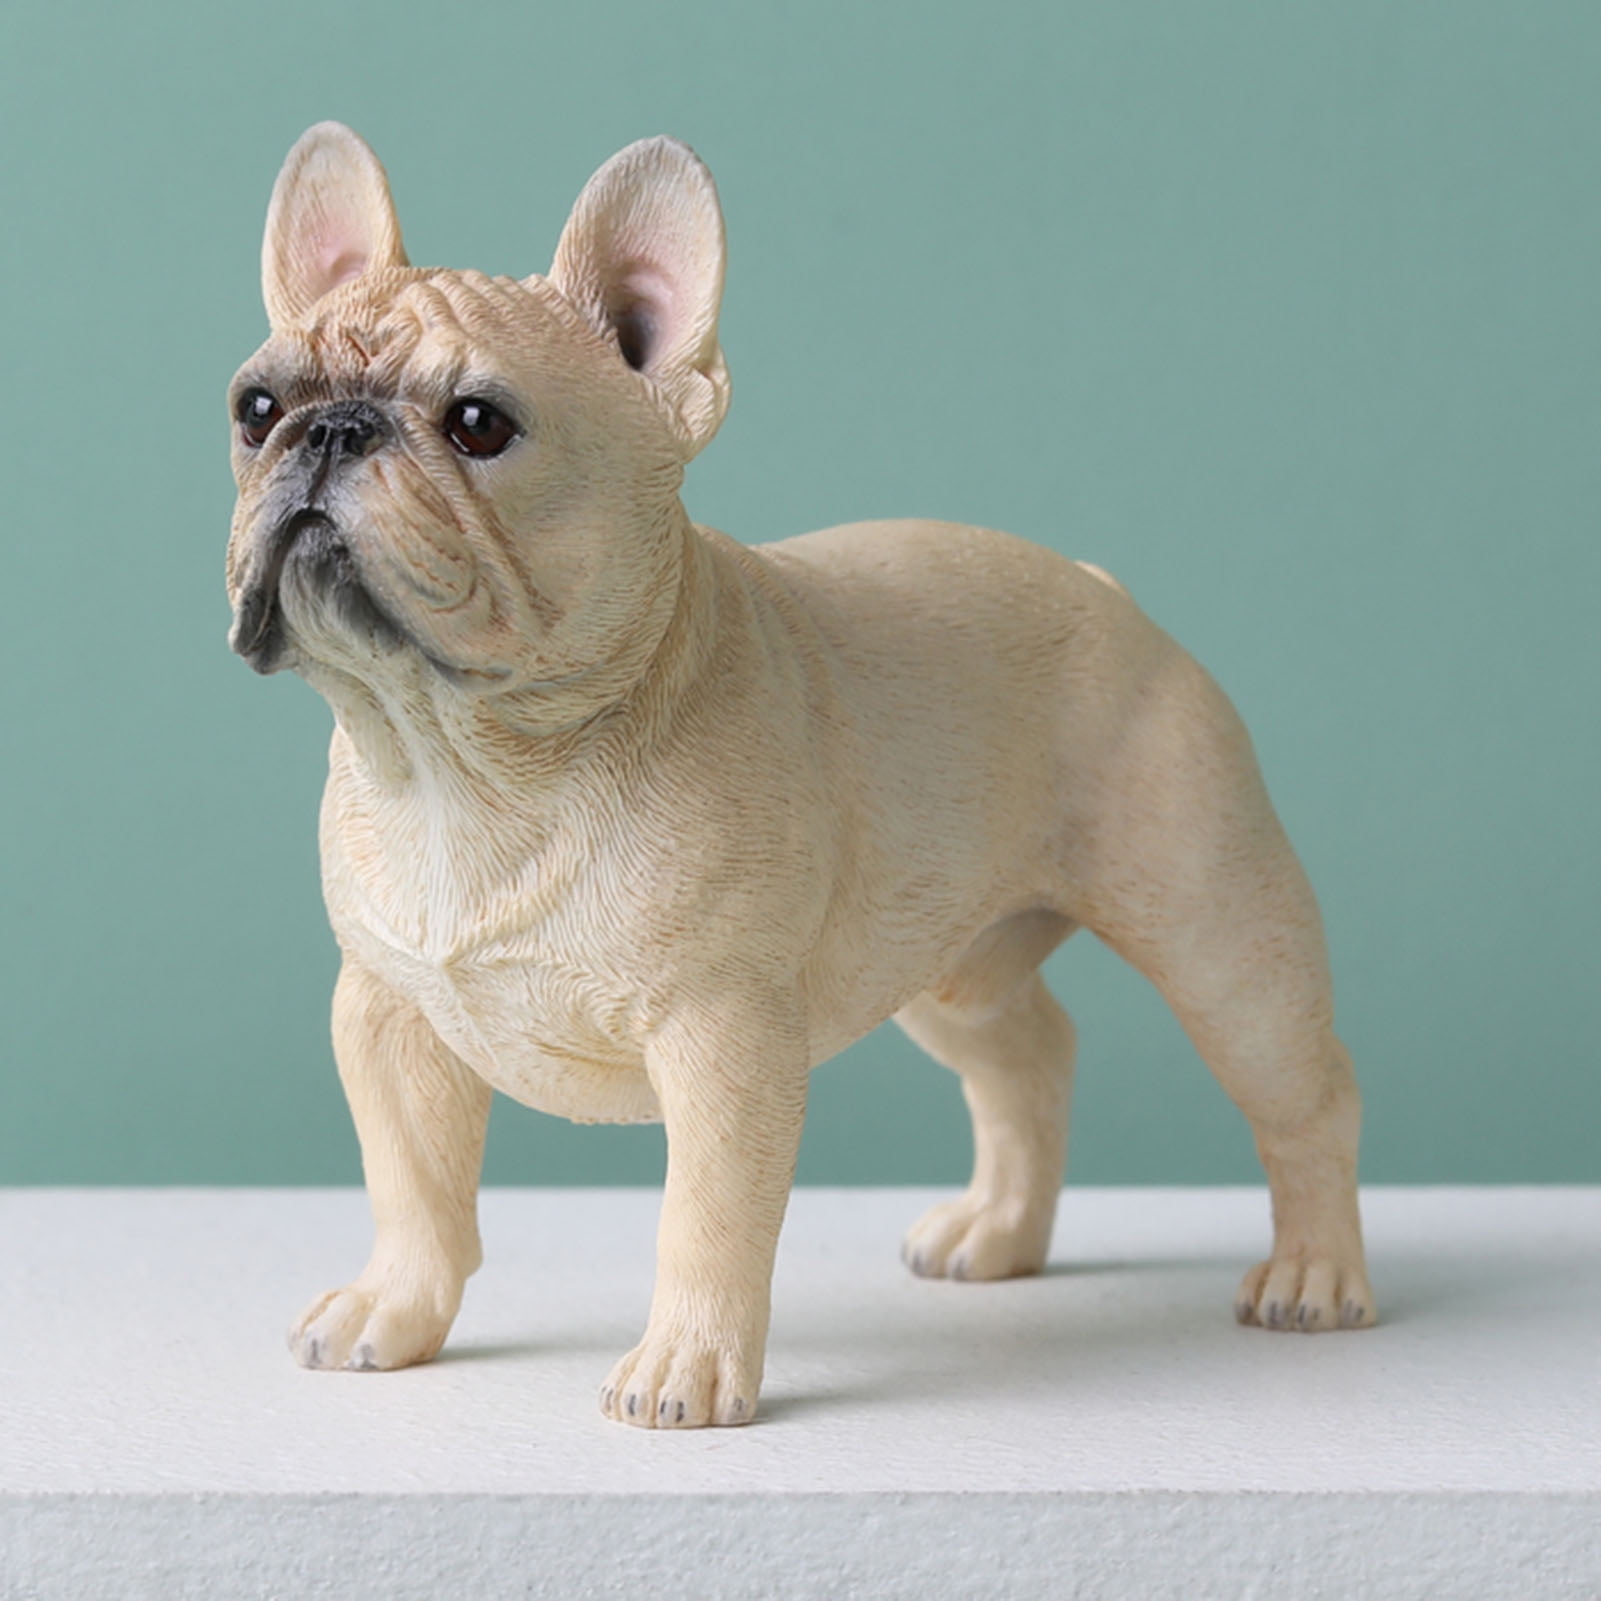 Realistic Lifelike French Bulldog Puppy Statue 2.95 Tall Frenchie Figurine Dog Animal Collectible, Yellow